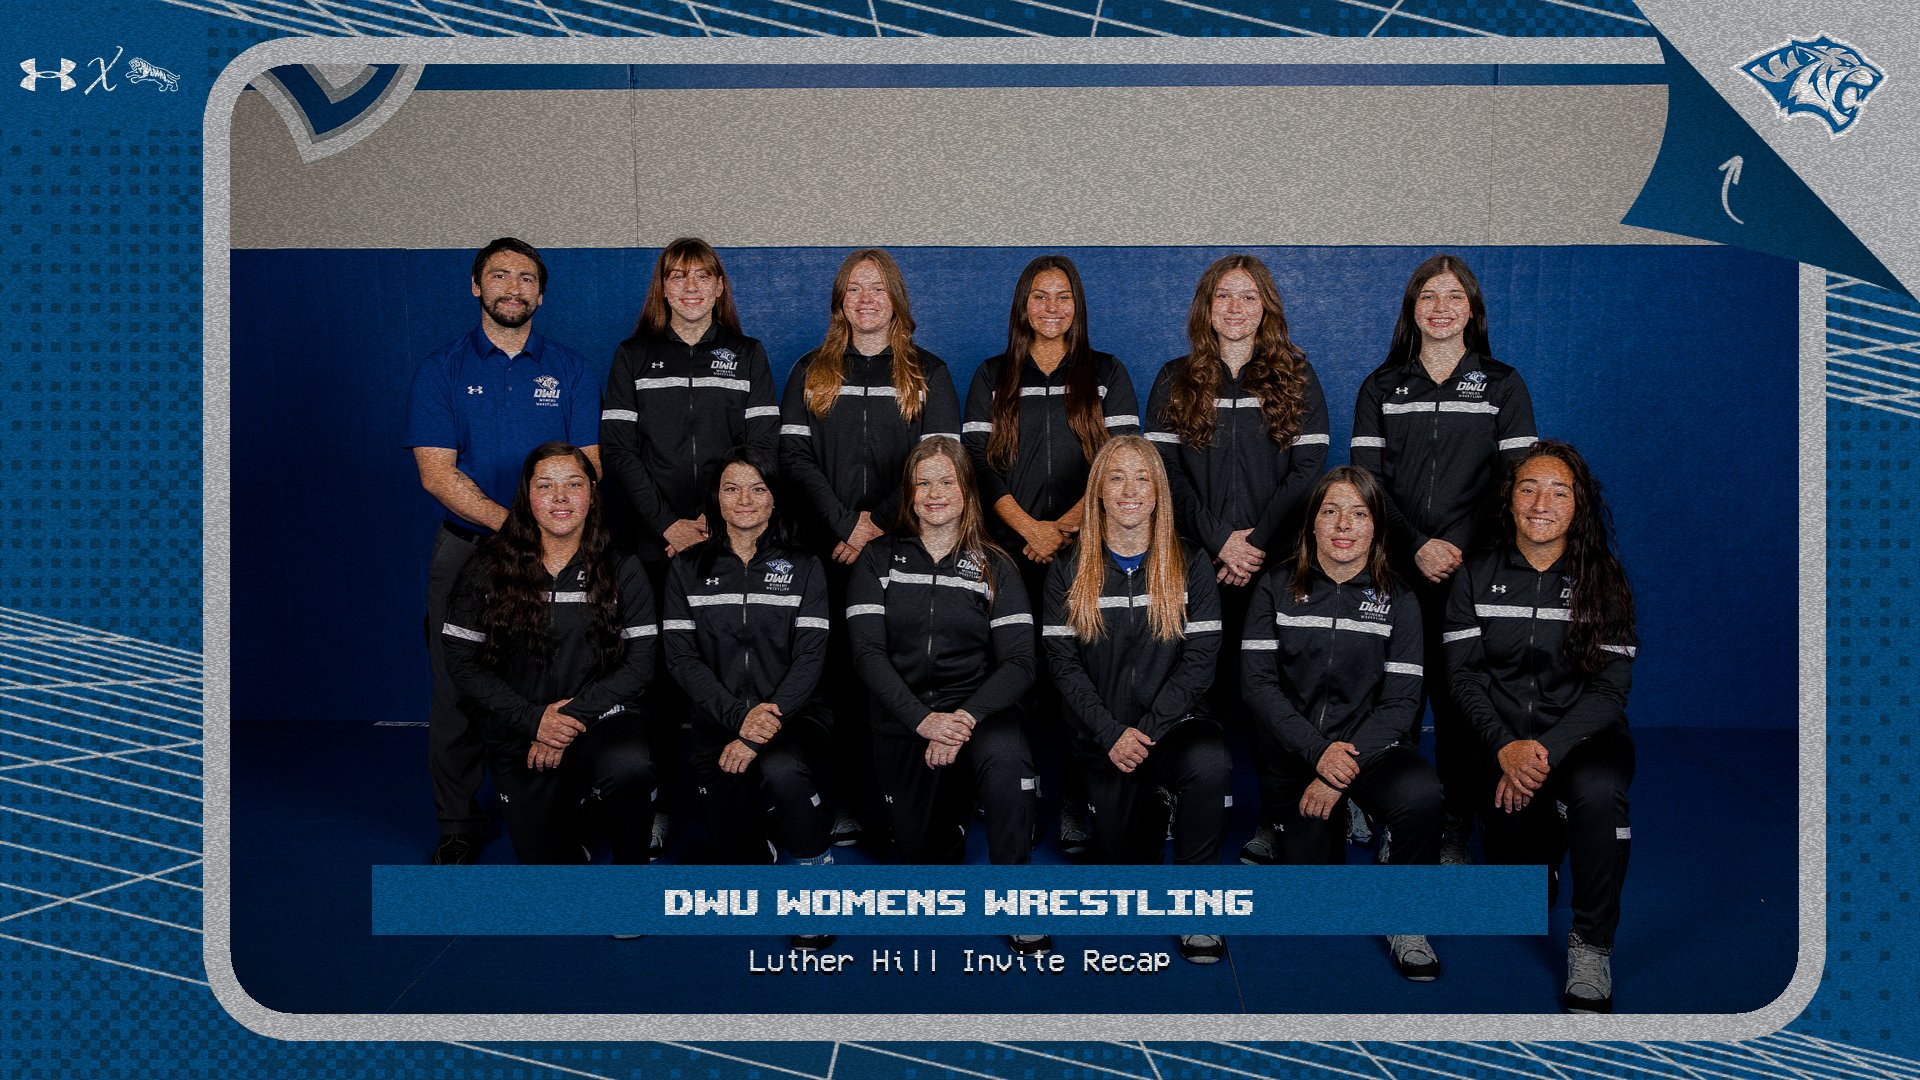 WOMENS WRESTLING SHOWS IMPROVEMENT AT LUTHER HILL INVITE